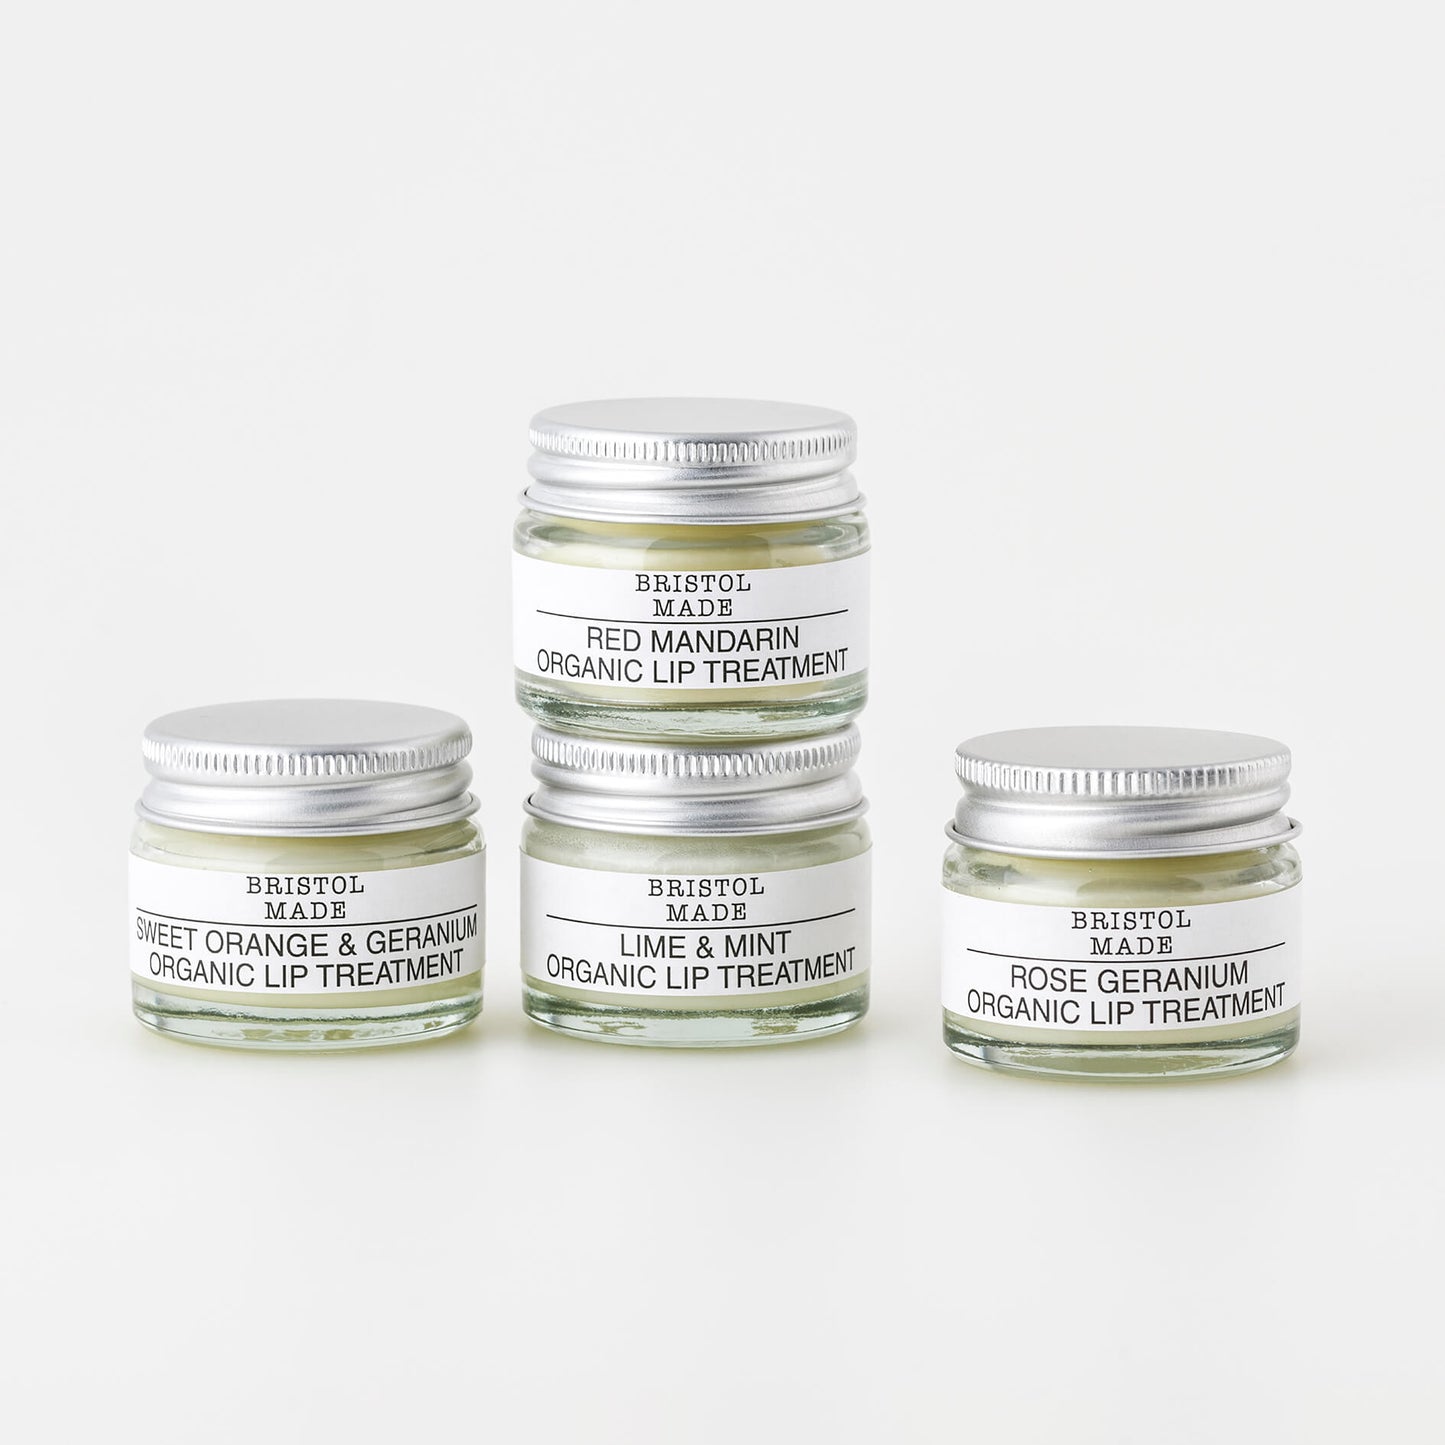 an image of four different Bristolmade lip balms, in 15ml clear glass jars, with white labels and black text, showing the different scents and ingredients of each product.